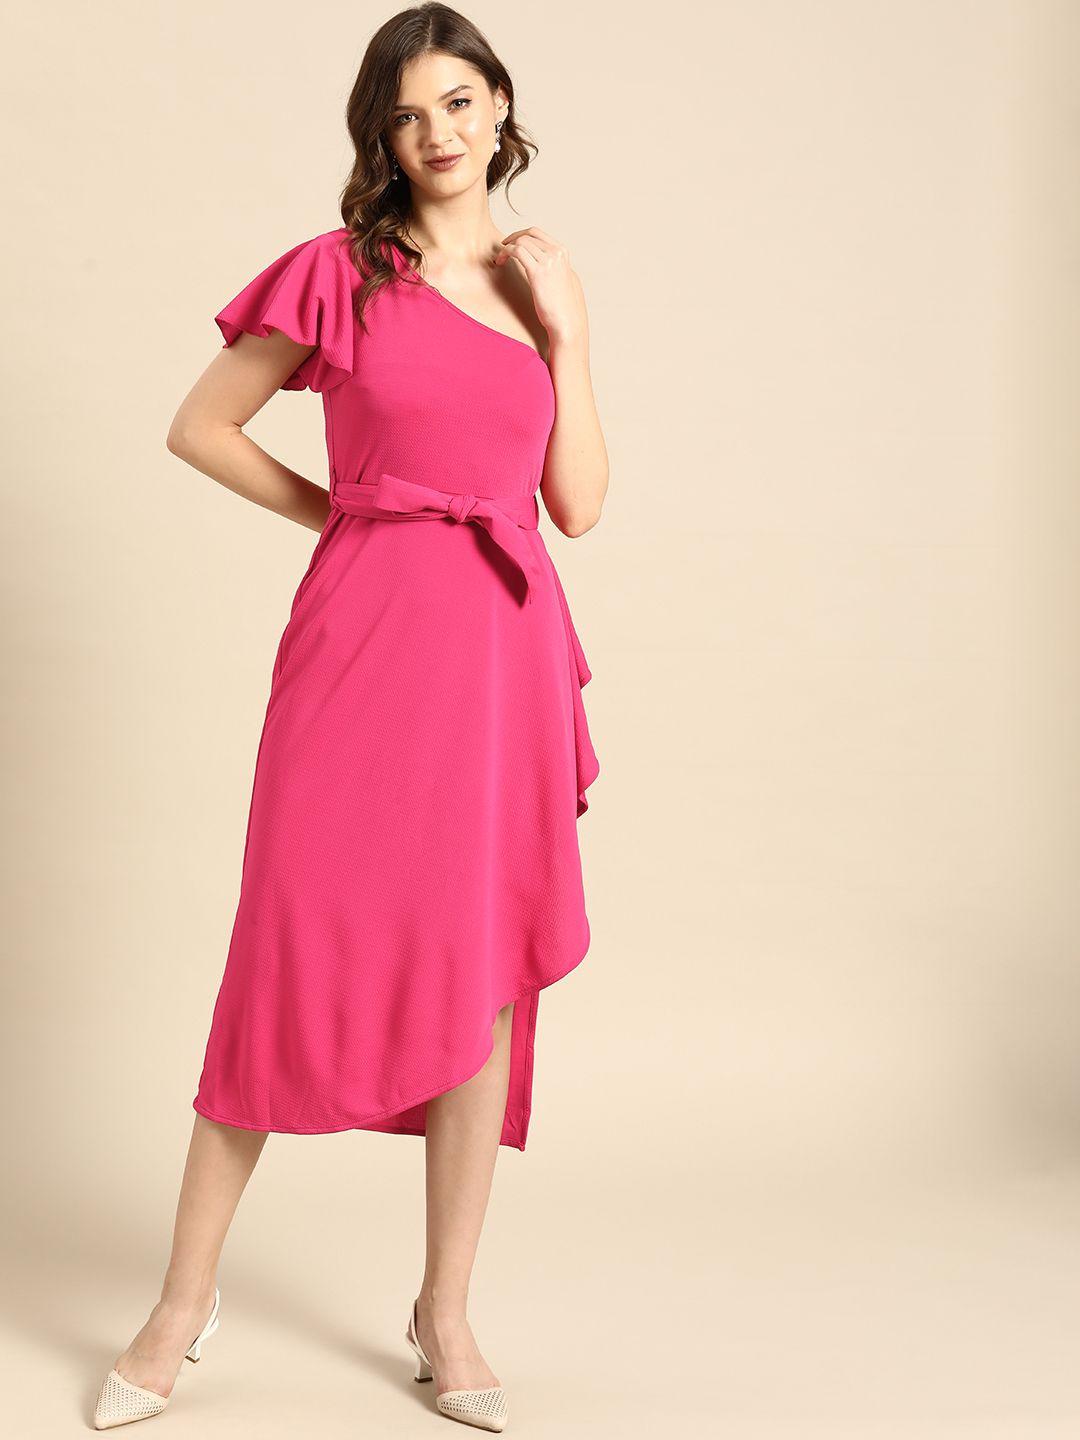 dodo & moa women pink solid one shoulder midi fit and flare dress with belt